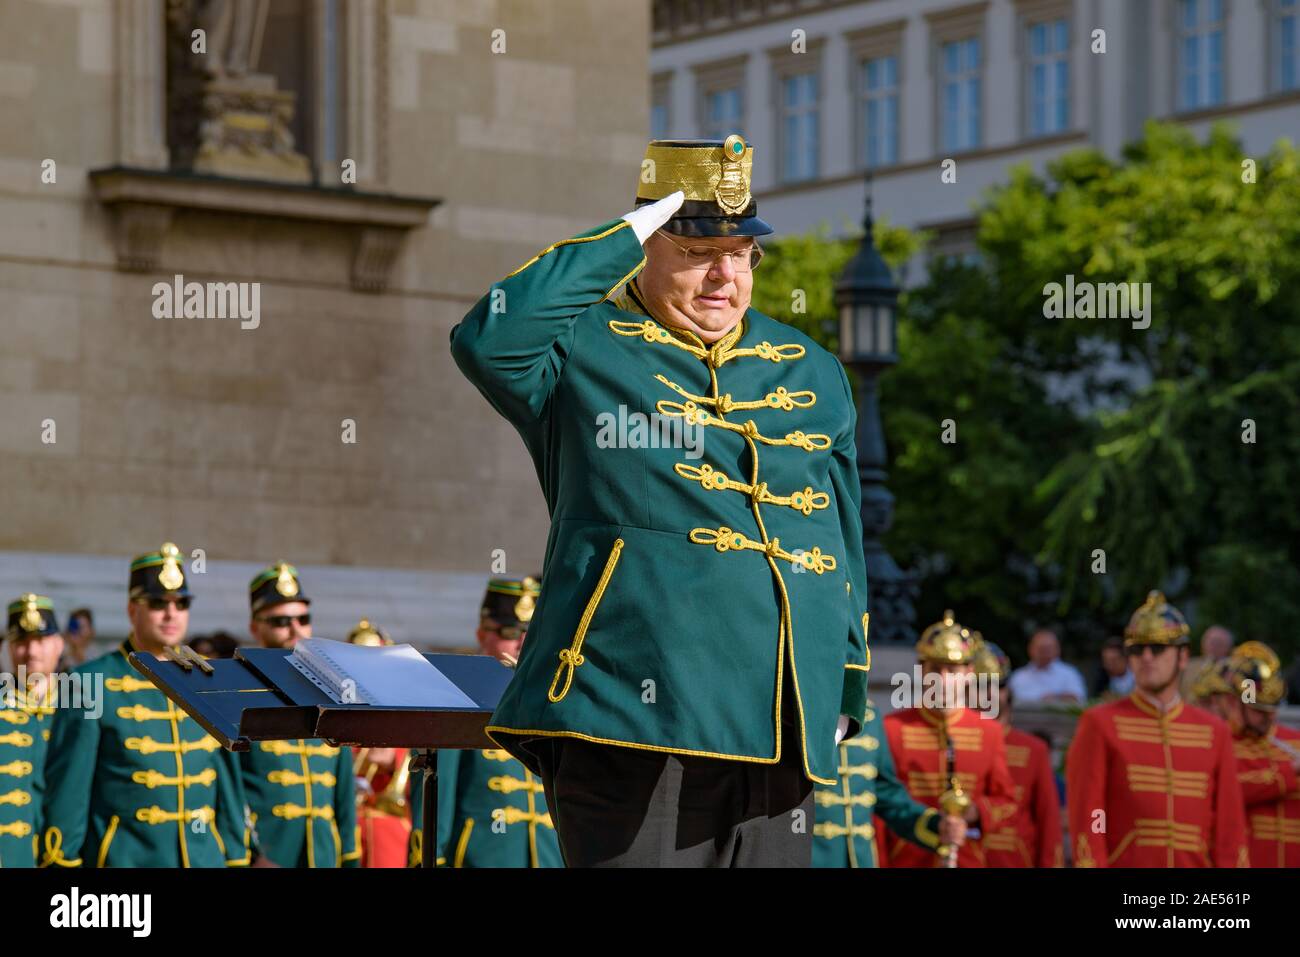 Music performance by Hungarian military band in front of St. Stephen's Basilica in Budapest, Hungary Stock Photo